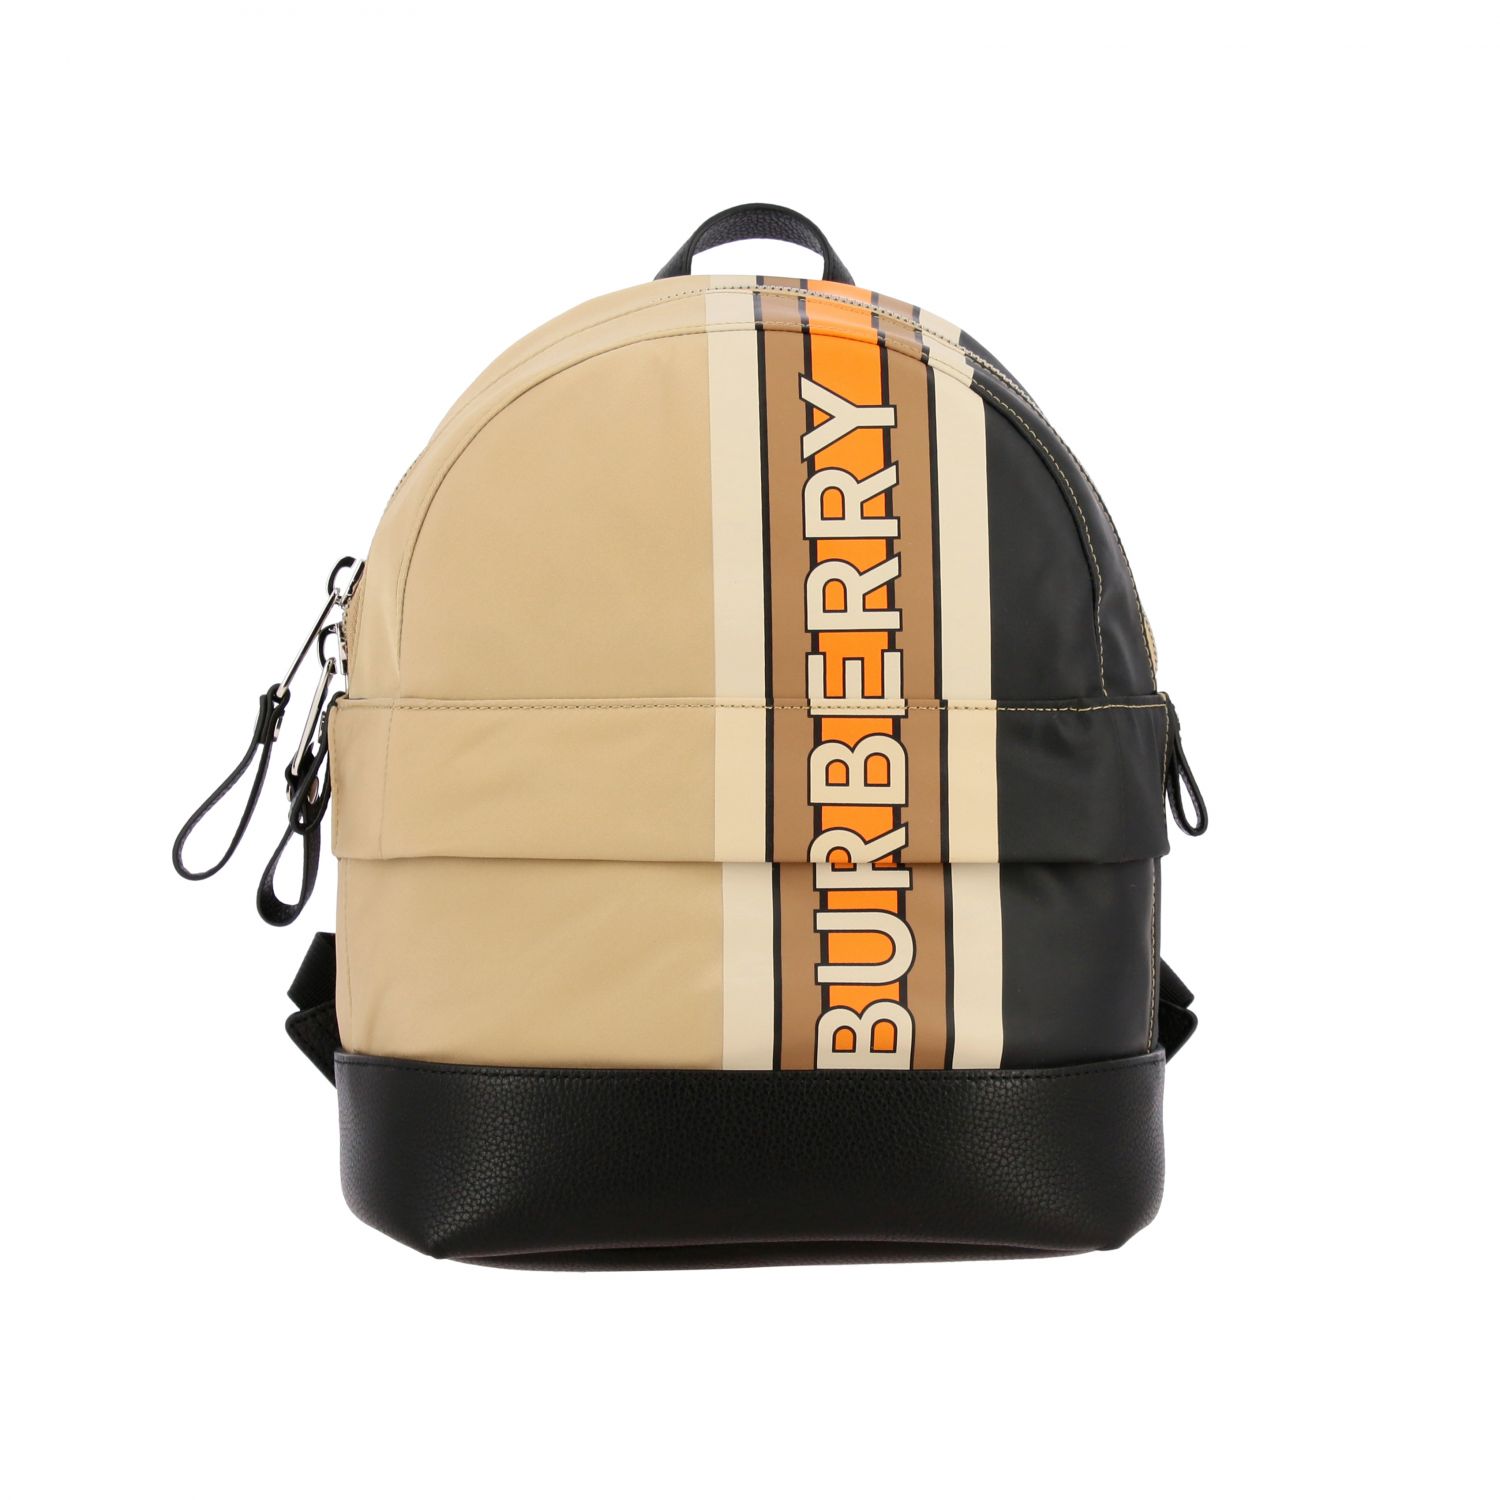 Burberry Outlet: backpack in canvas and leather with logo print - Beige |  Burberry bag 8023910 online on 